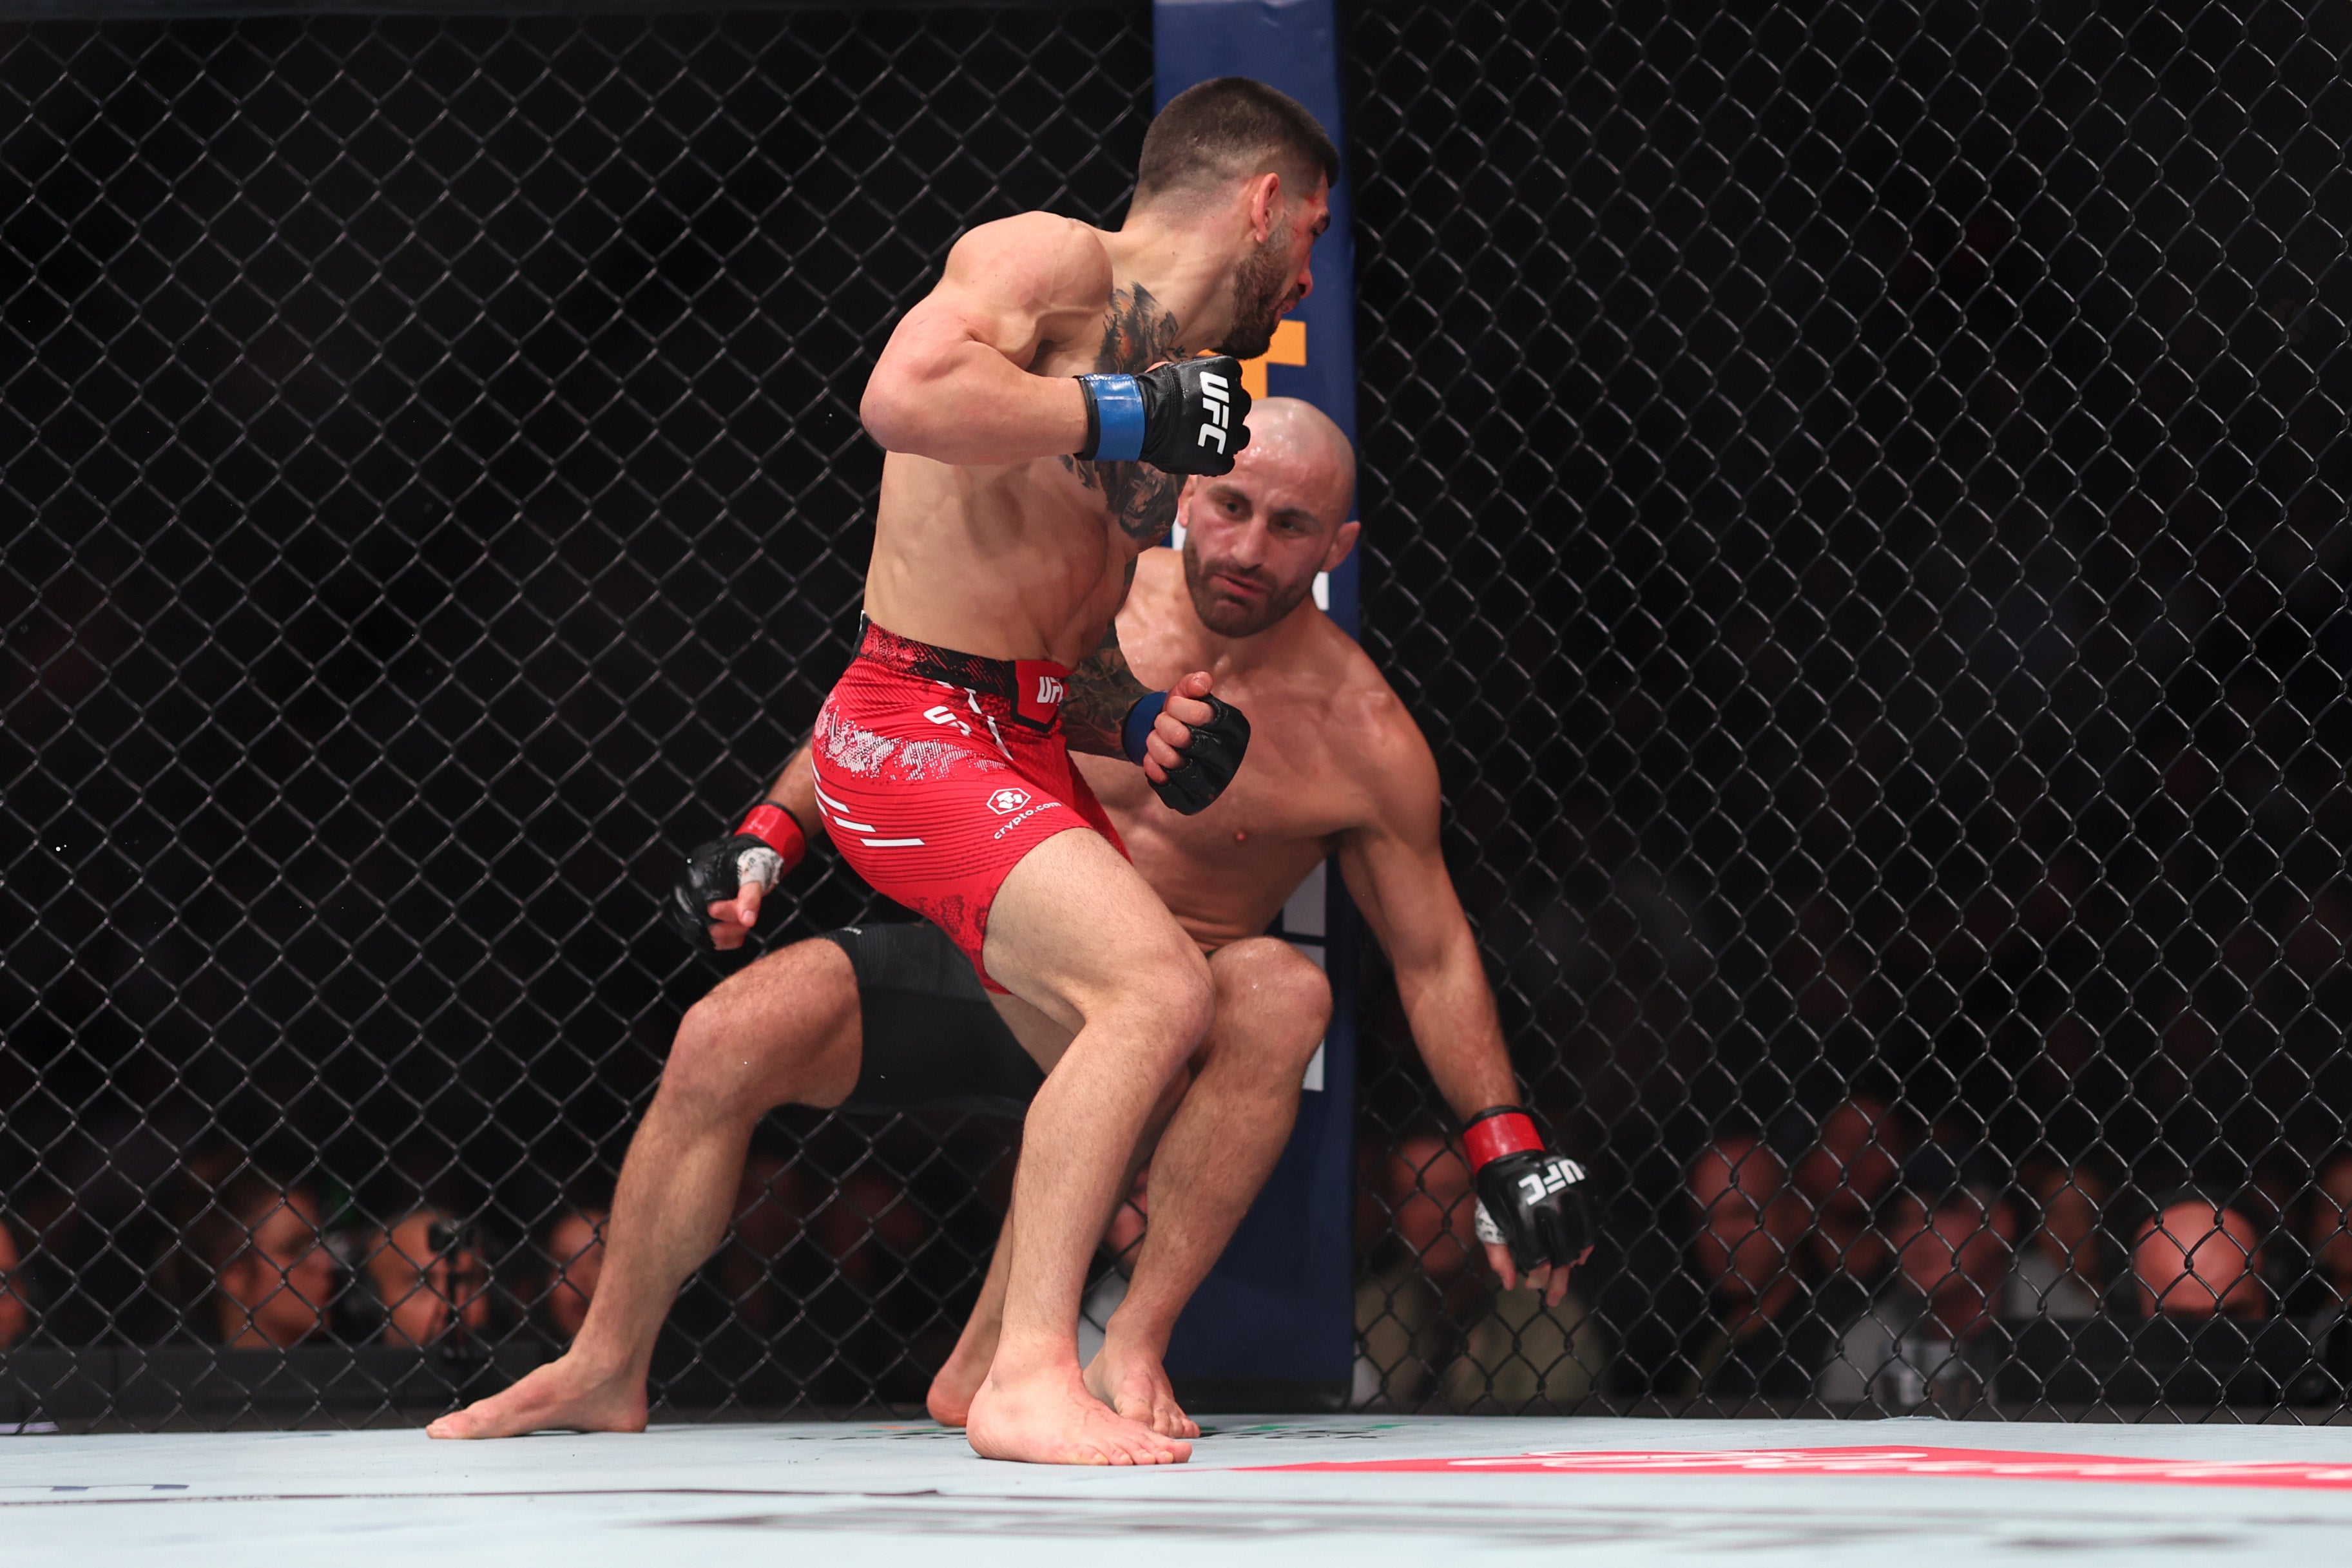 Topuria scored the knockout in round two, winning the UFC men’s featherweight title